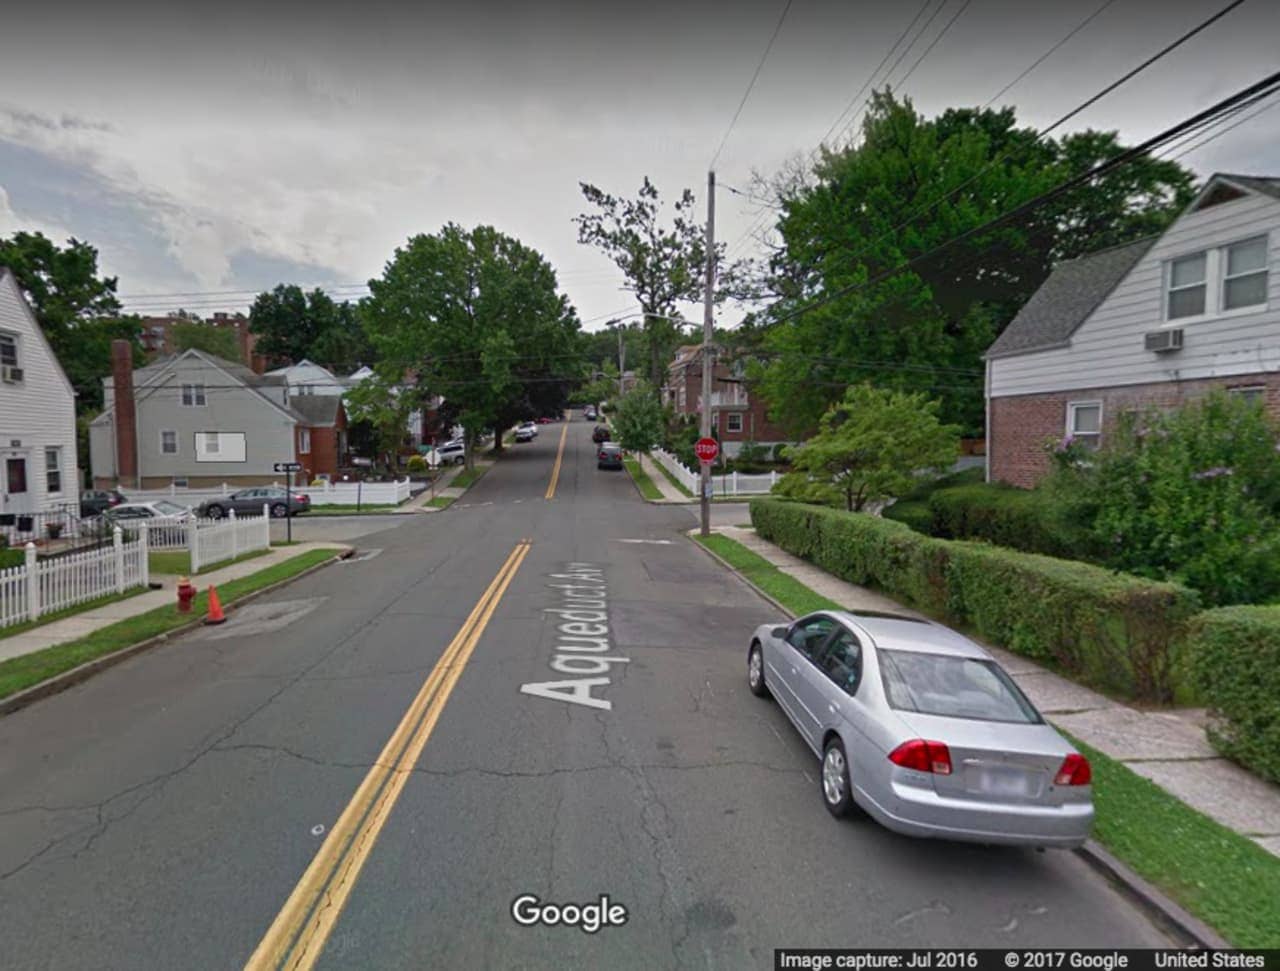 The area of Aqueduct Avenue, just east of I-87, where the shooting occurred in Yonkers.